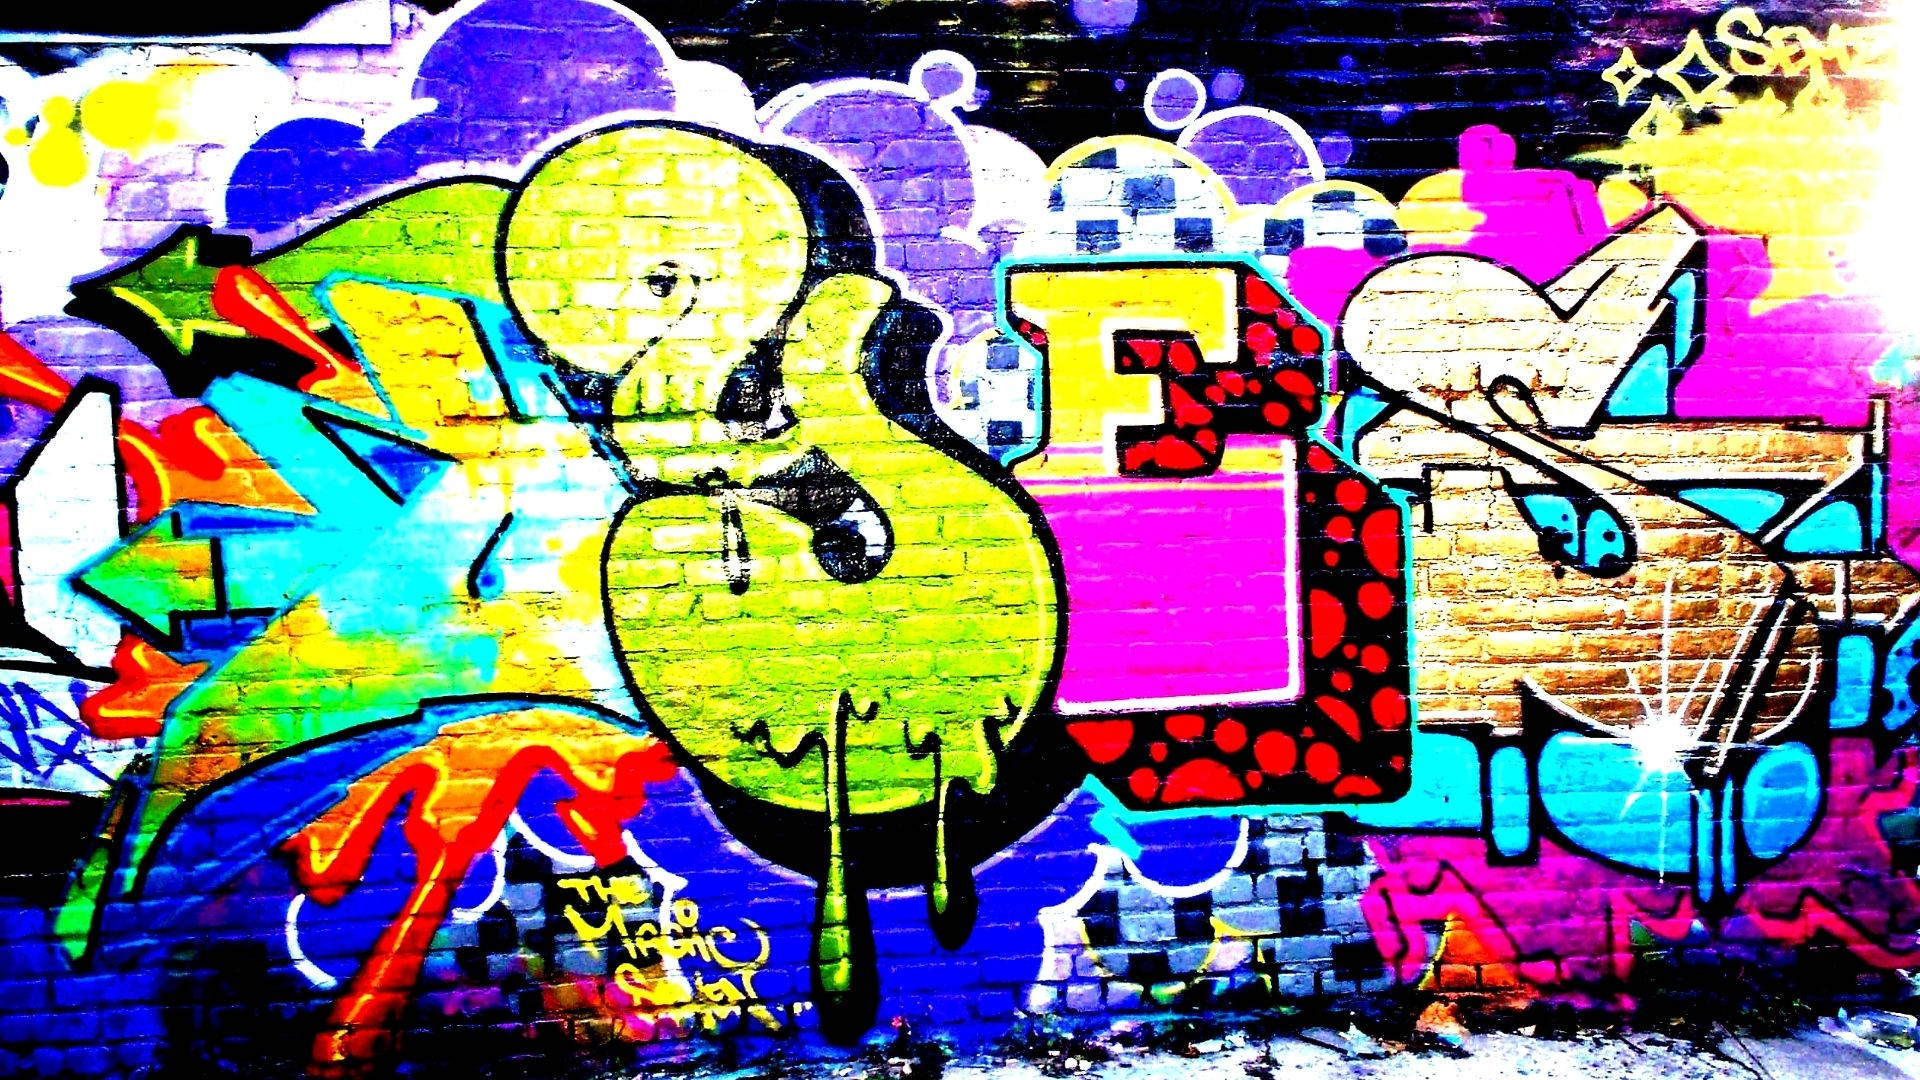 A colorful wallpaper of massive YES word graffiti on brick wall.